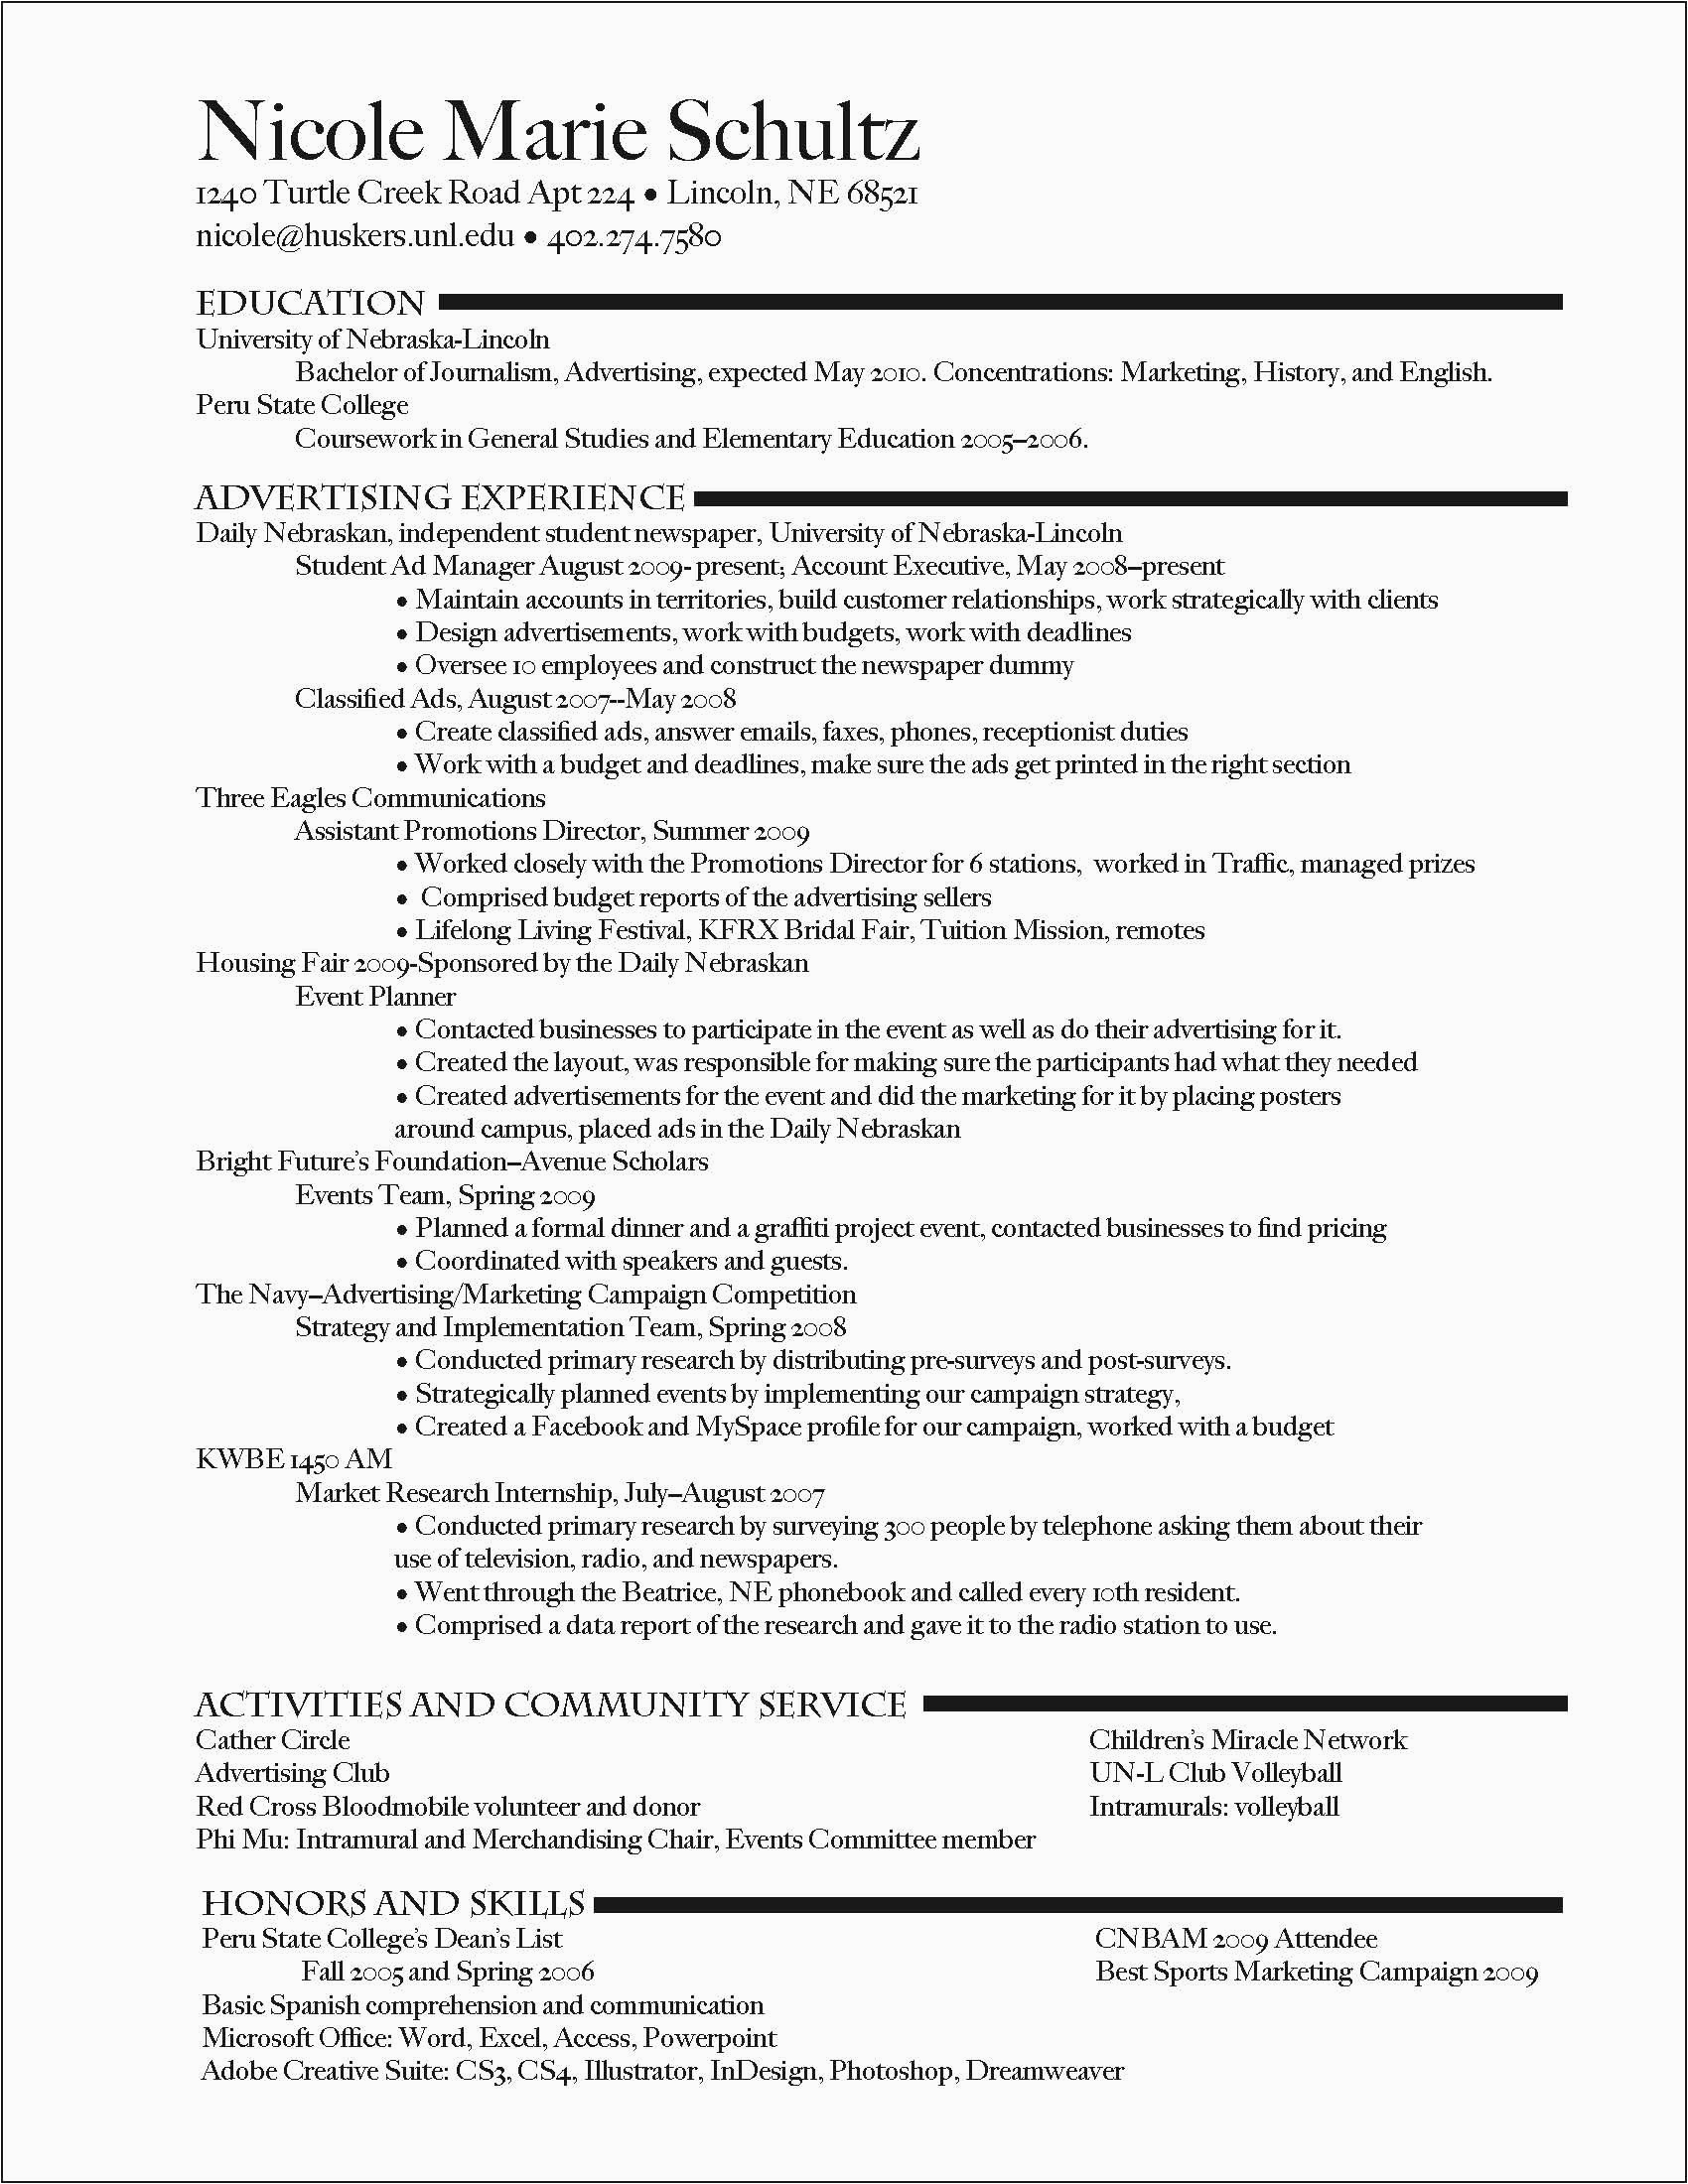 Resume References Available Upon Request Sample References Available Upon Request